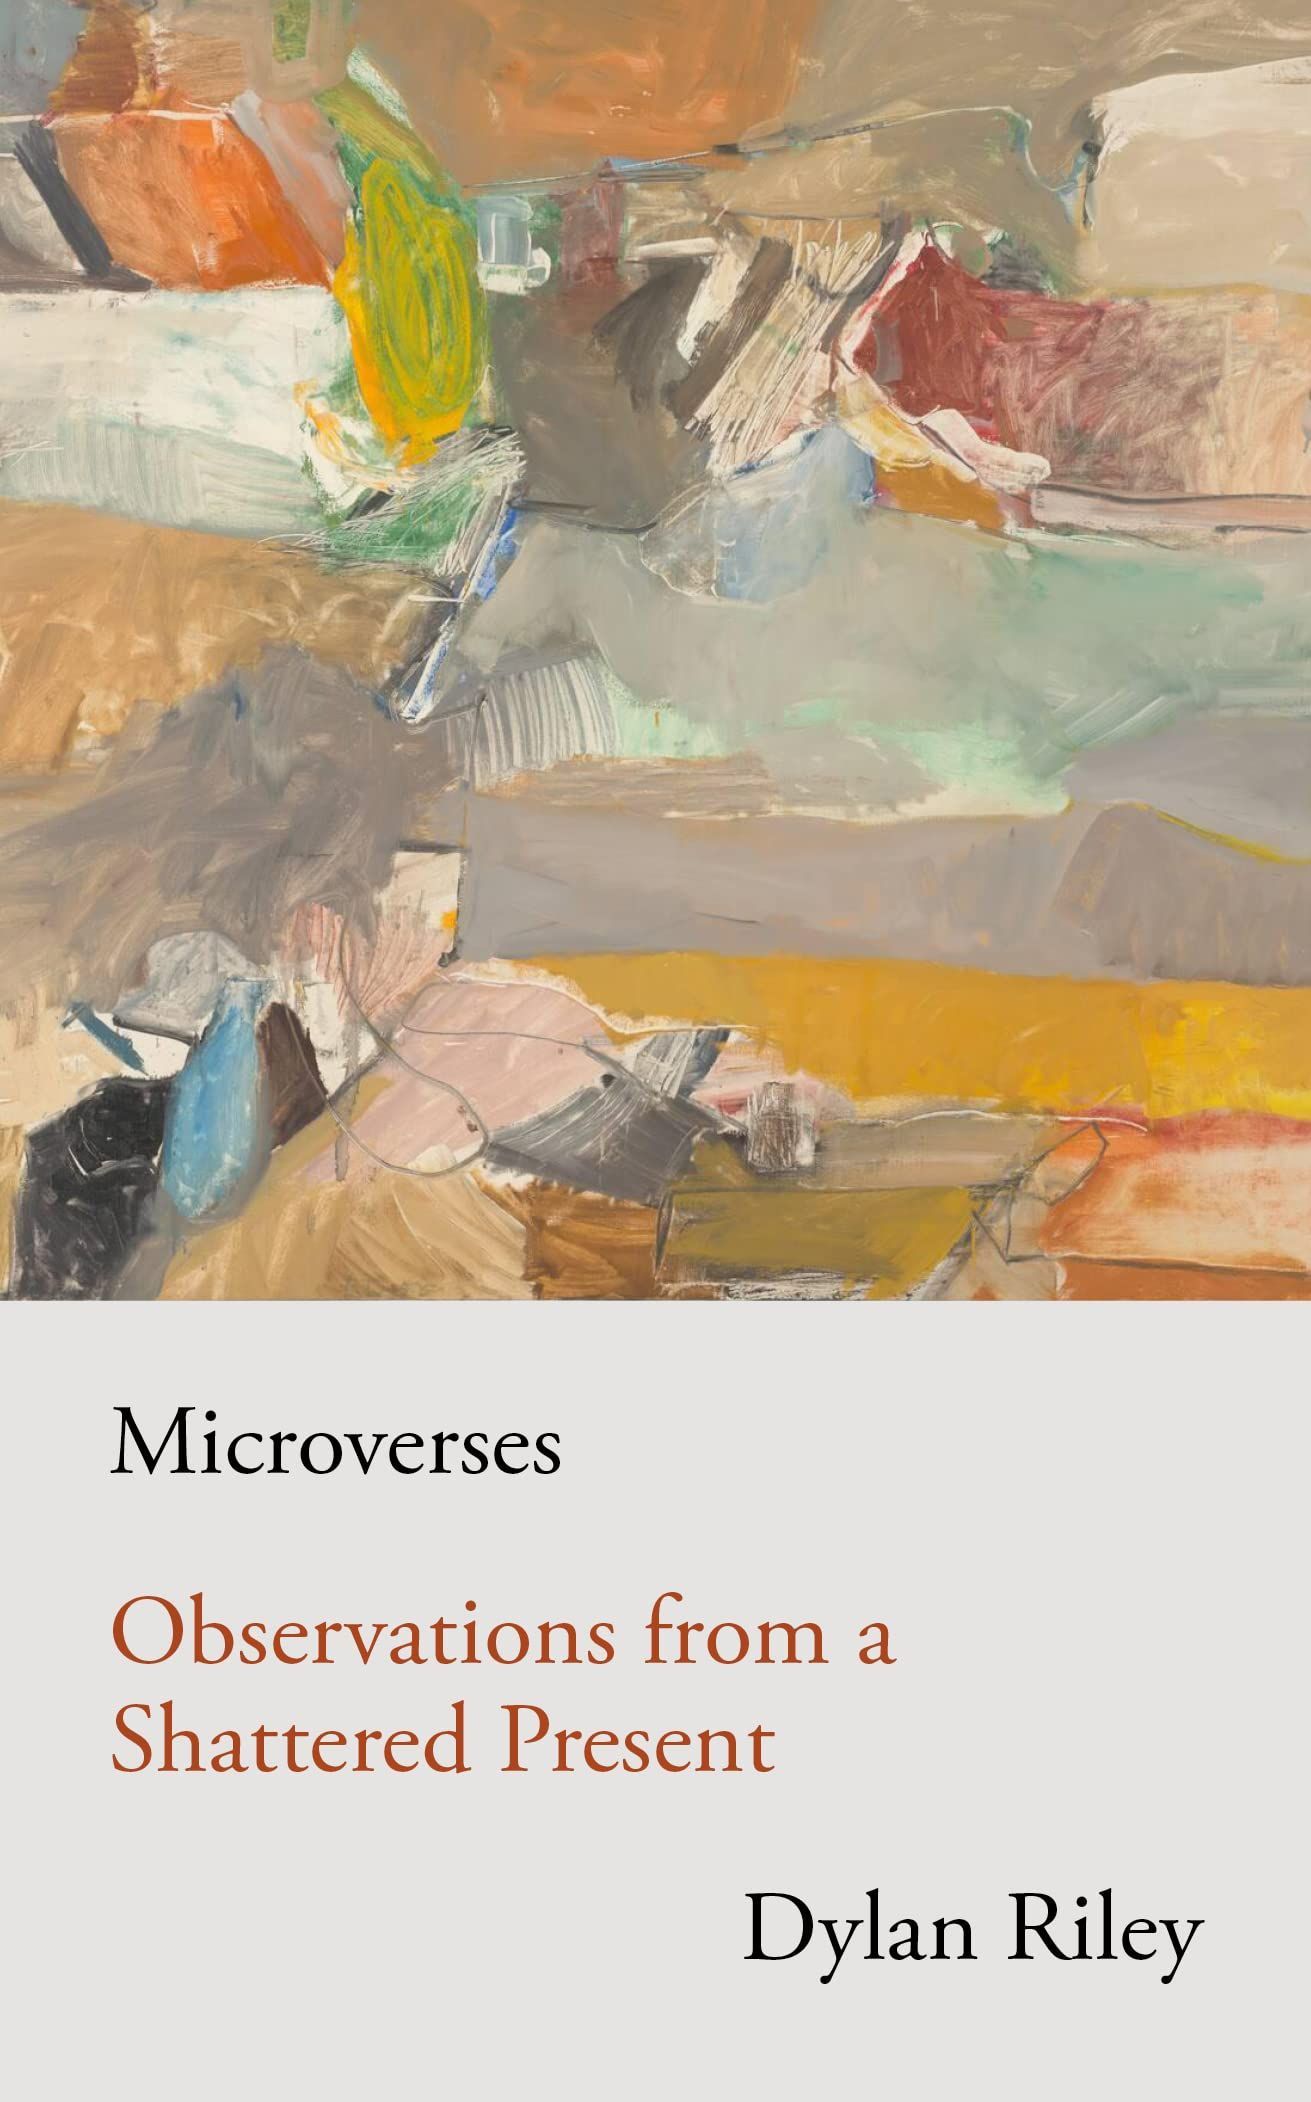 The Character of the Crisis: On Dylan Riley’s “Microverses”